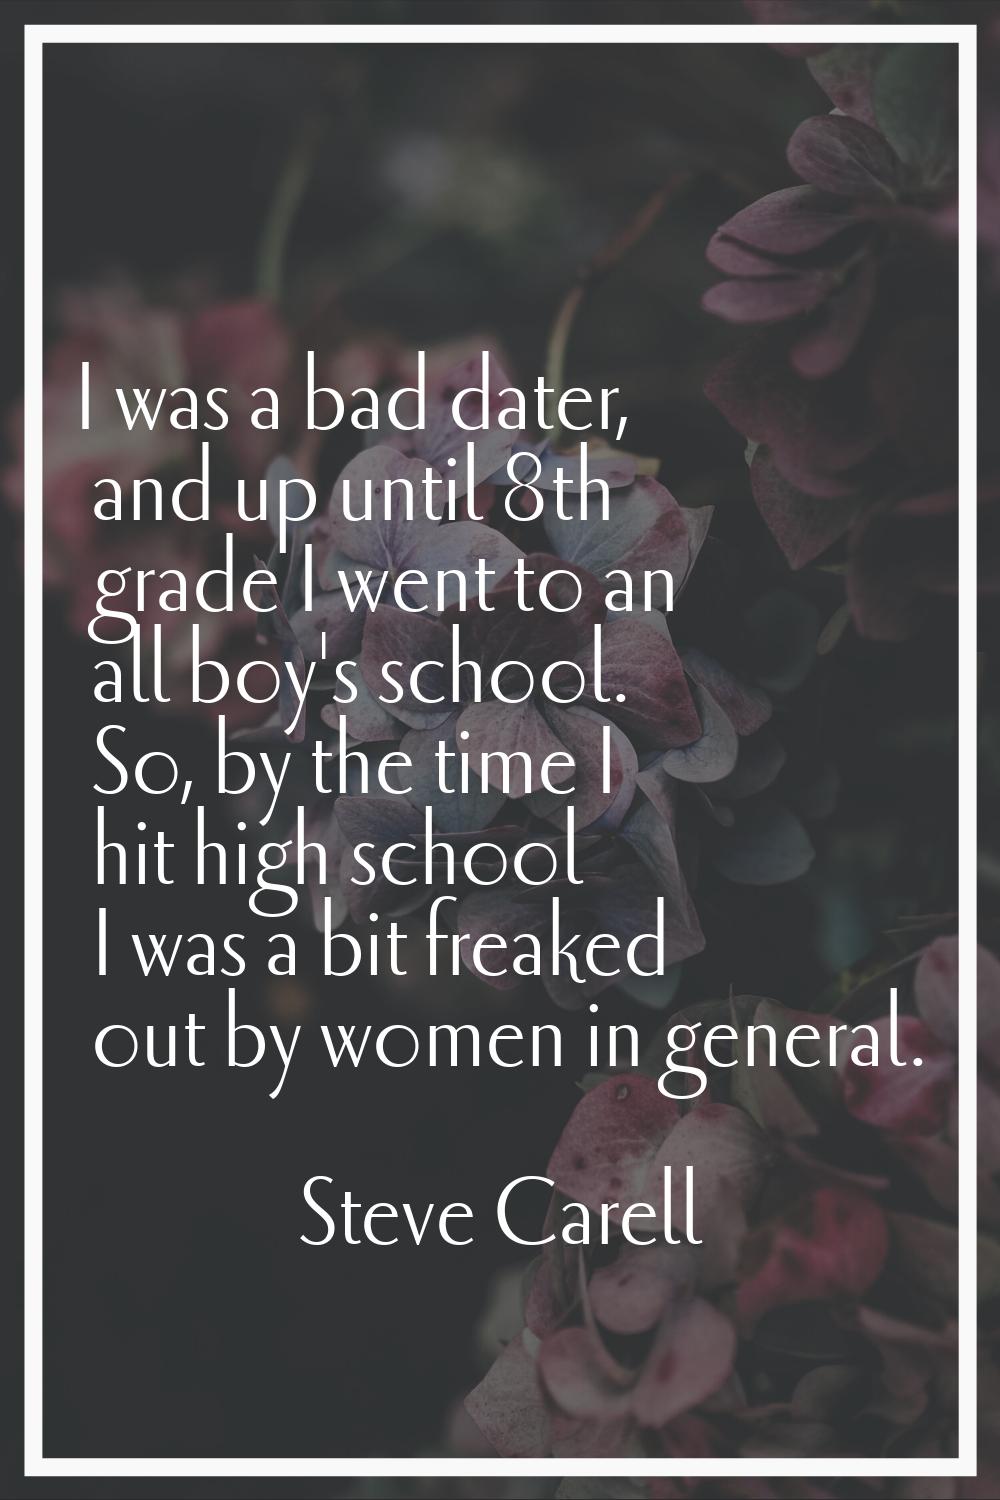 I was a bad dater, and up until 8th grade I went to an all boy's school. So, by the time I hit high